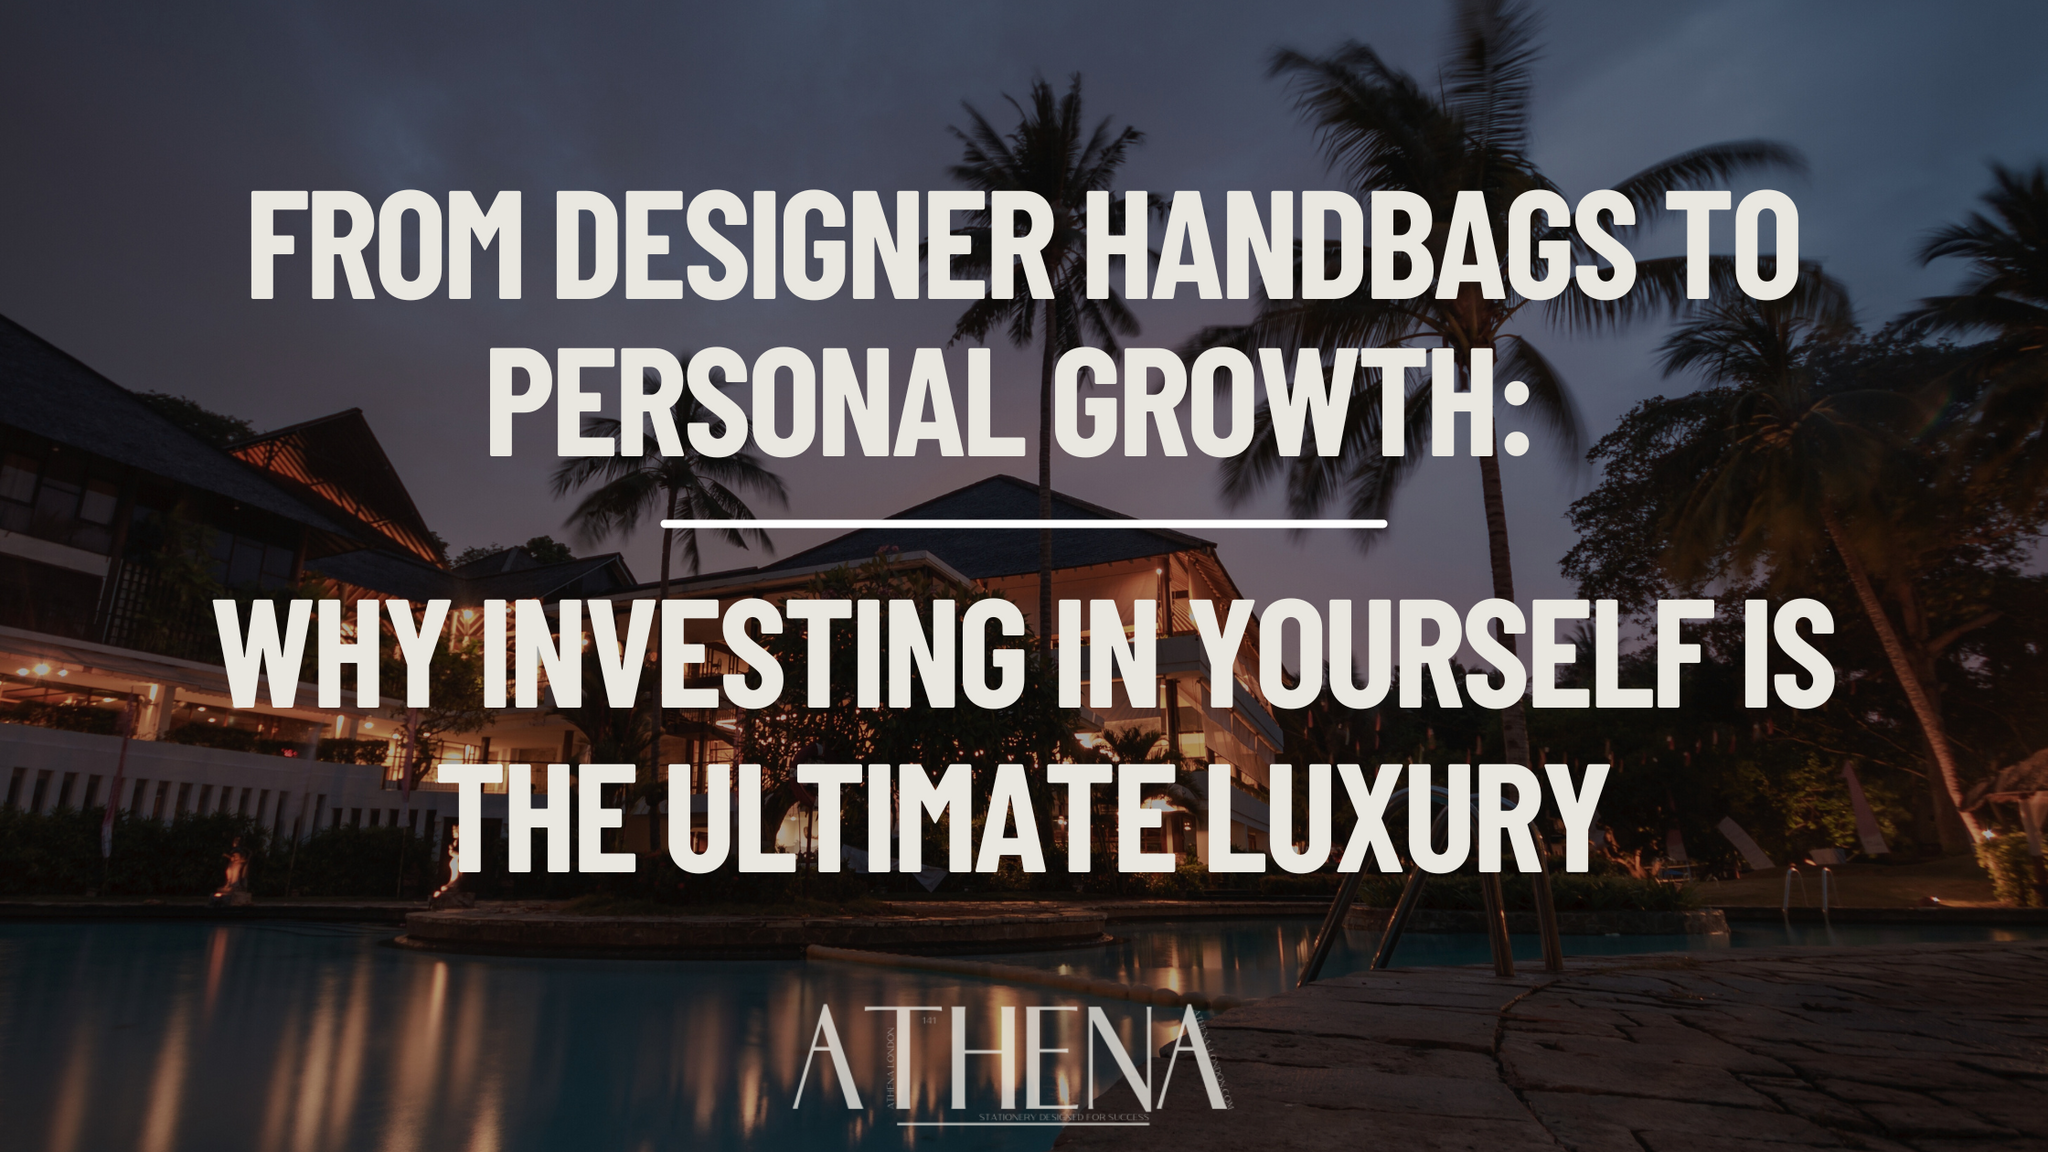 From Designer Handbags to Personal Growth: Why Investing in Yourself is the Ultimate Luxury